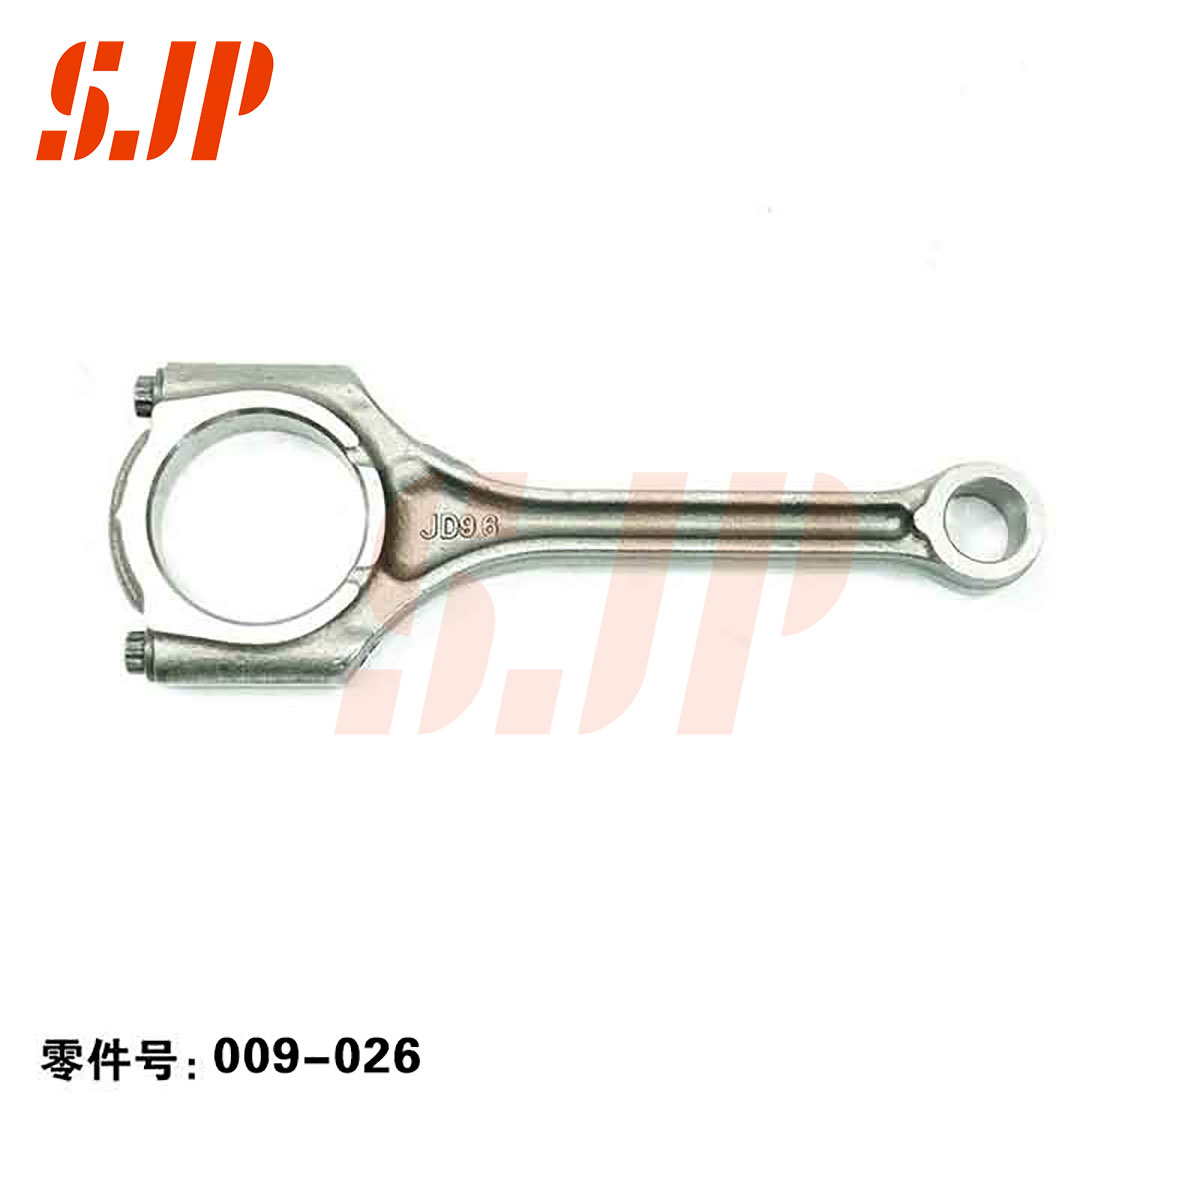 SJ-009-026 Connecting Rod For Jinbei CG14